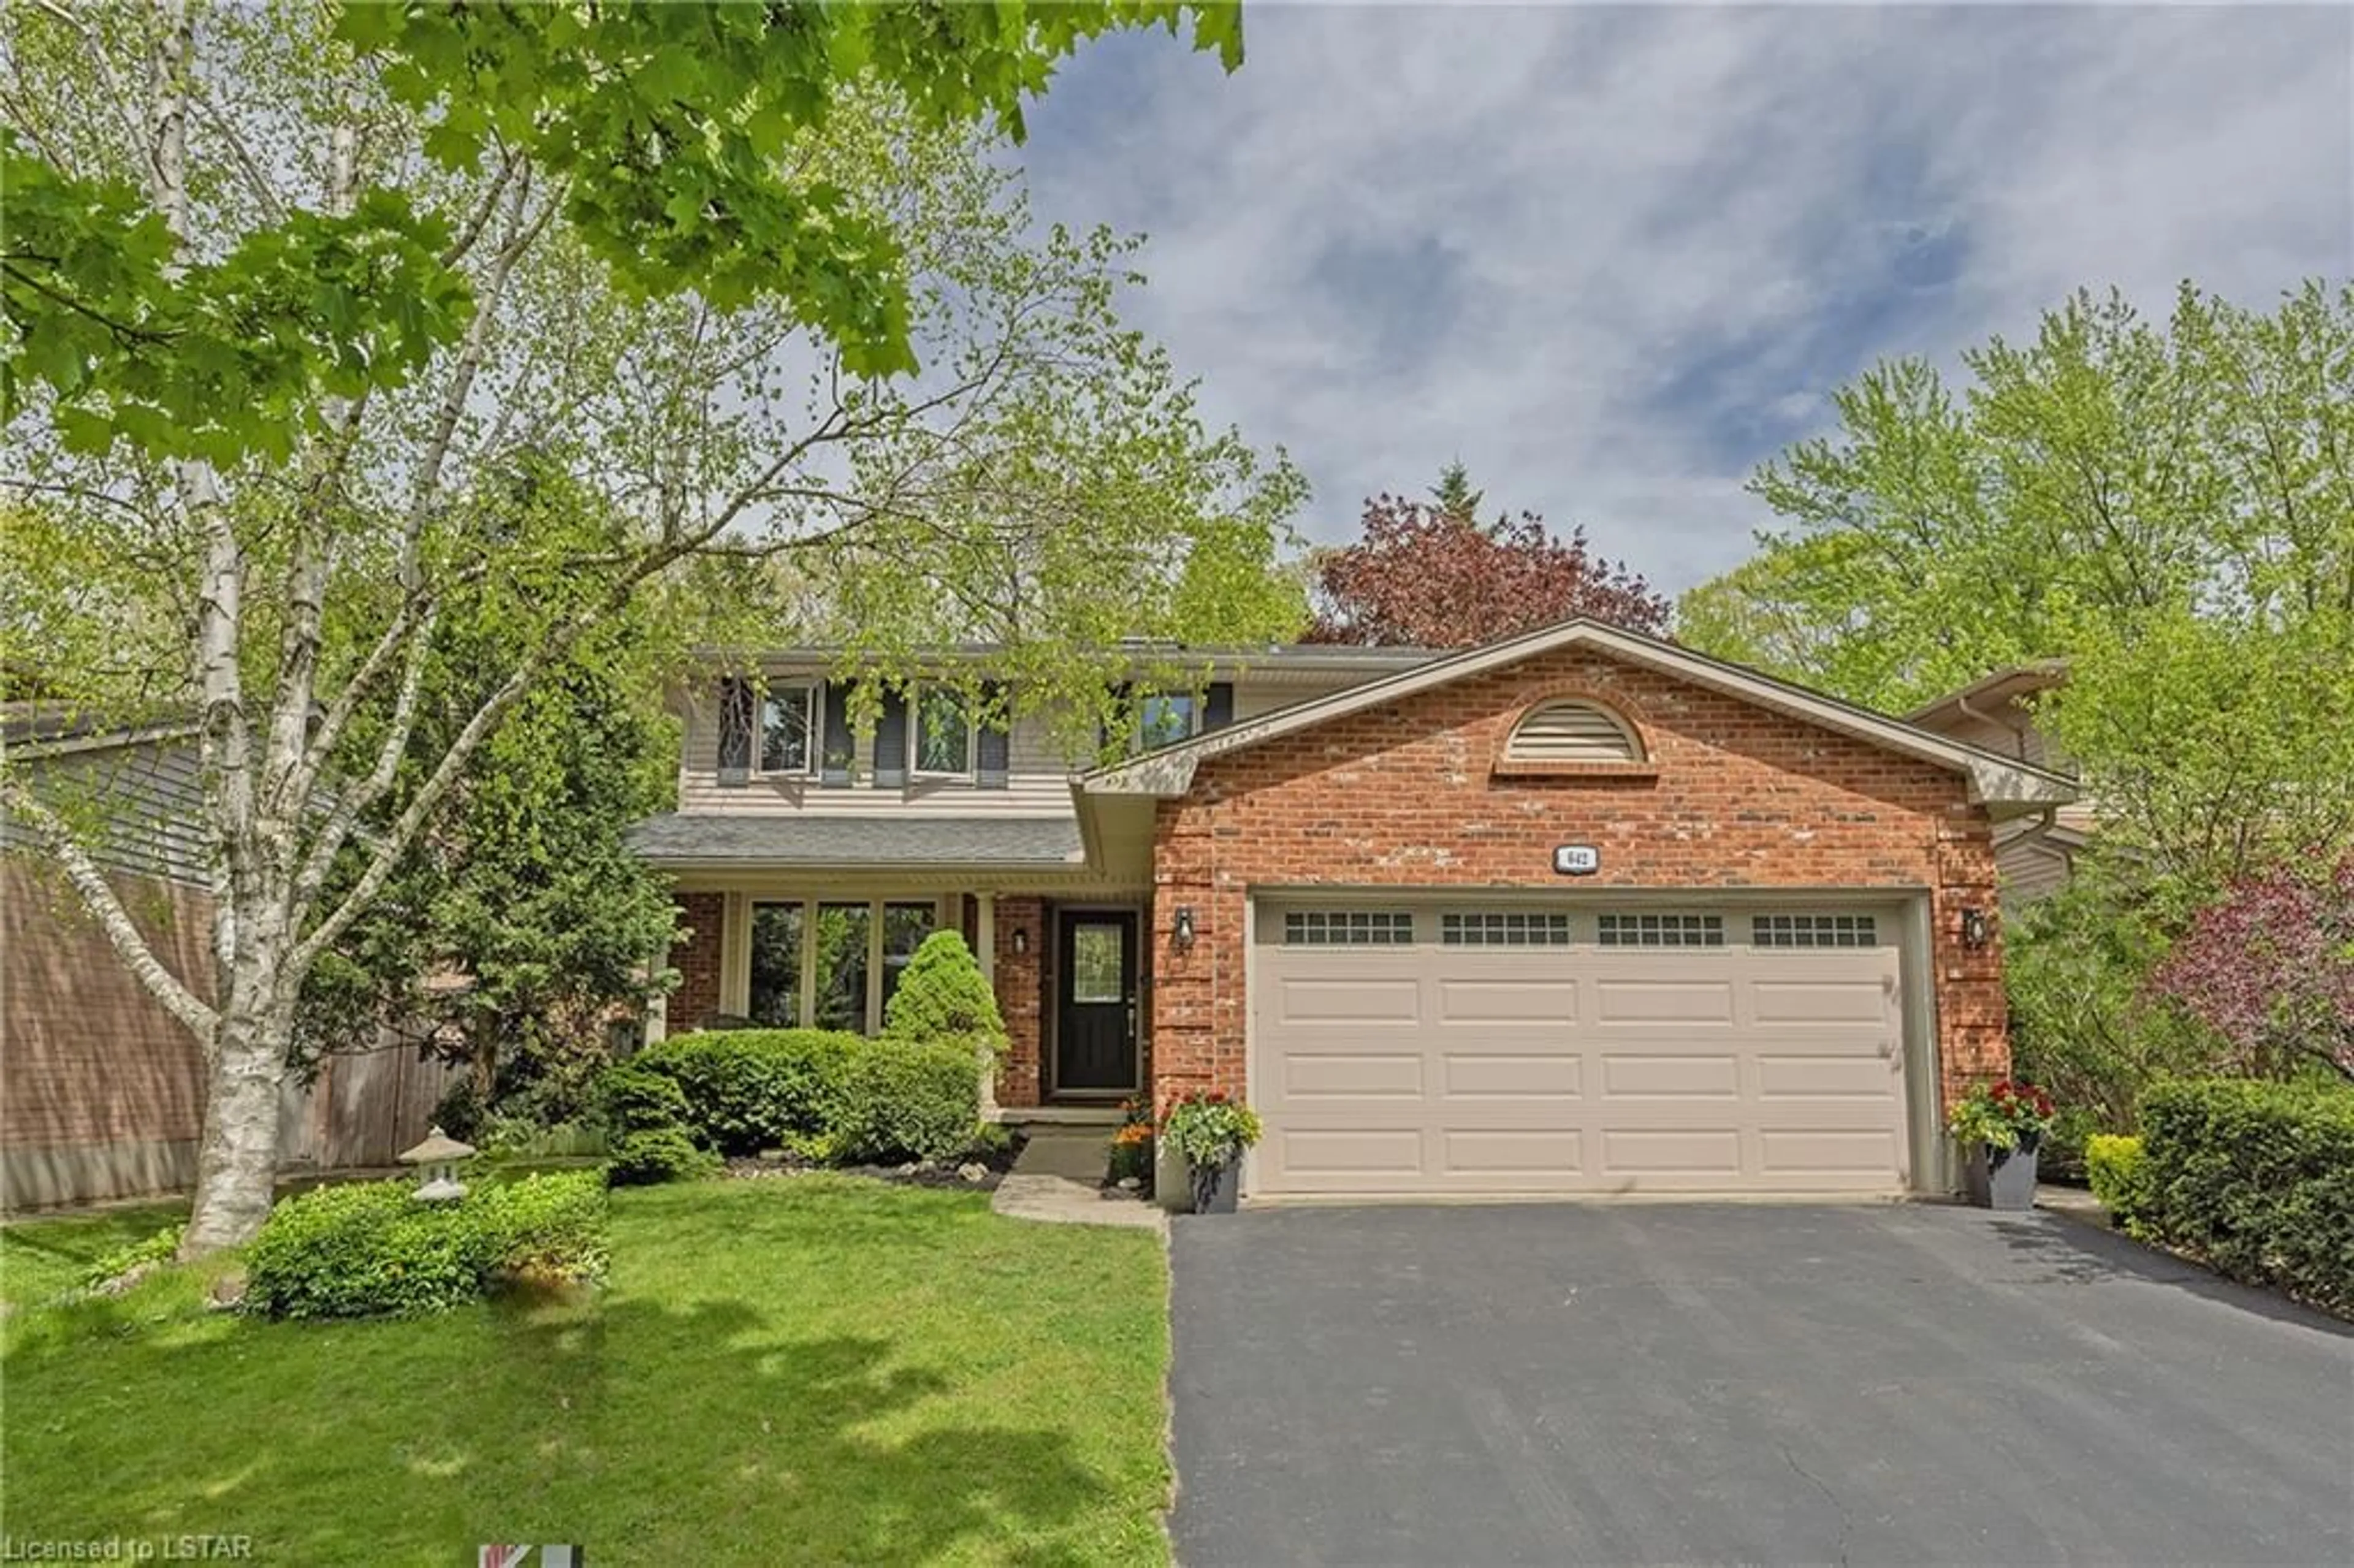 Home with brick exterior material for 642 Grand View Ave, London Ontario N6K 3G8